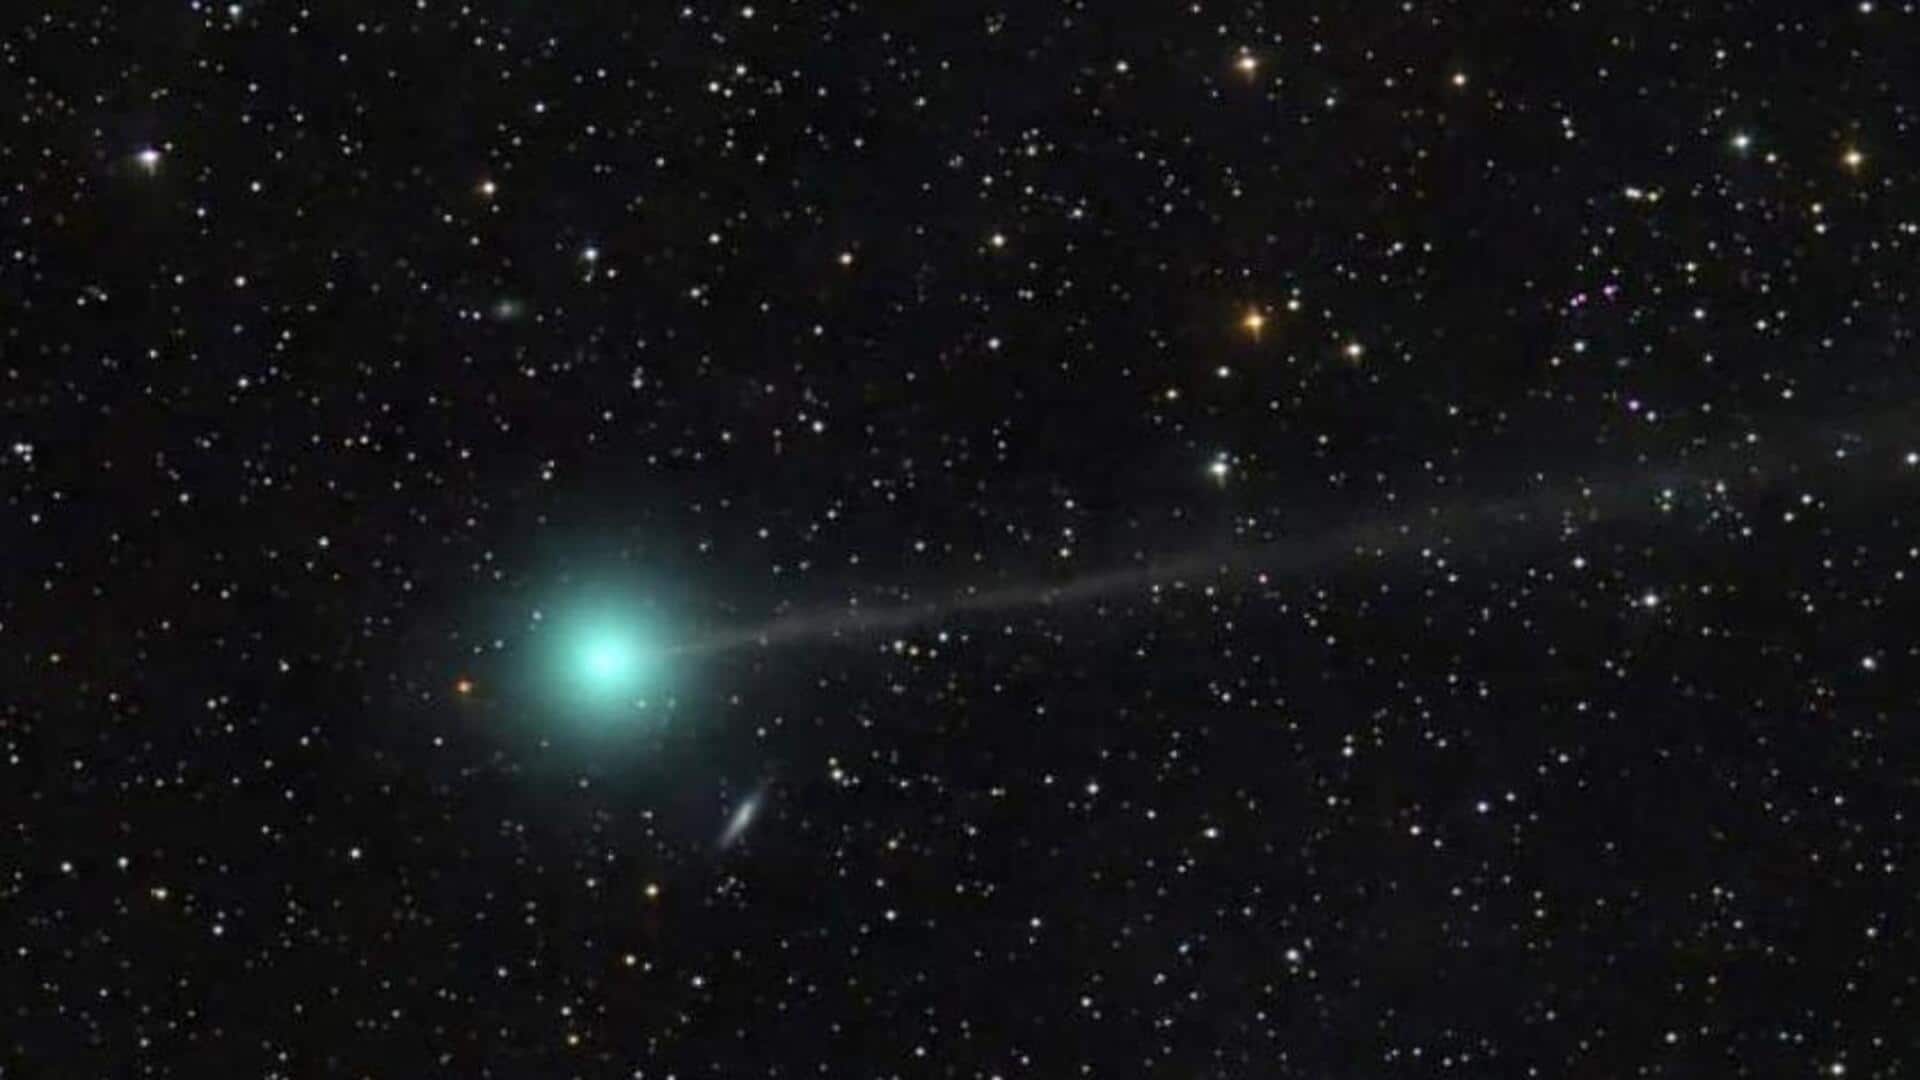 Comet Nishimura to make a spectacular appearance on September 12